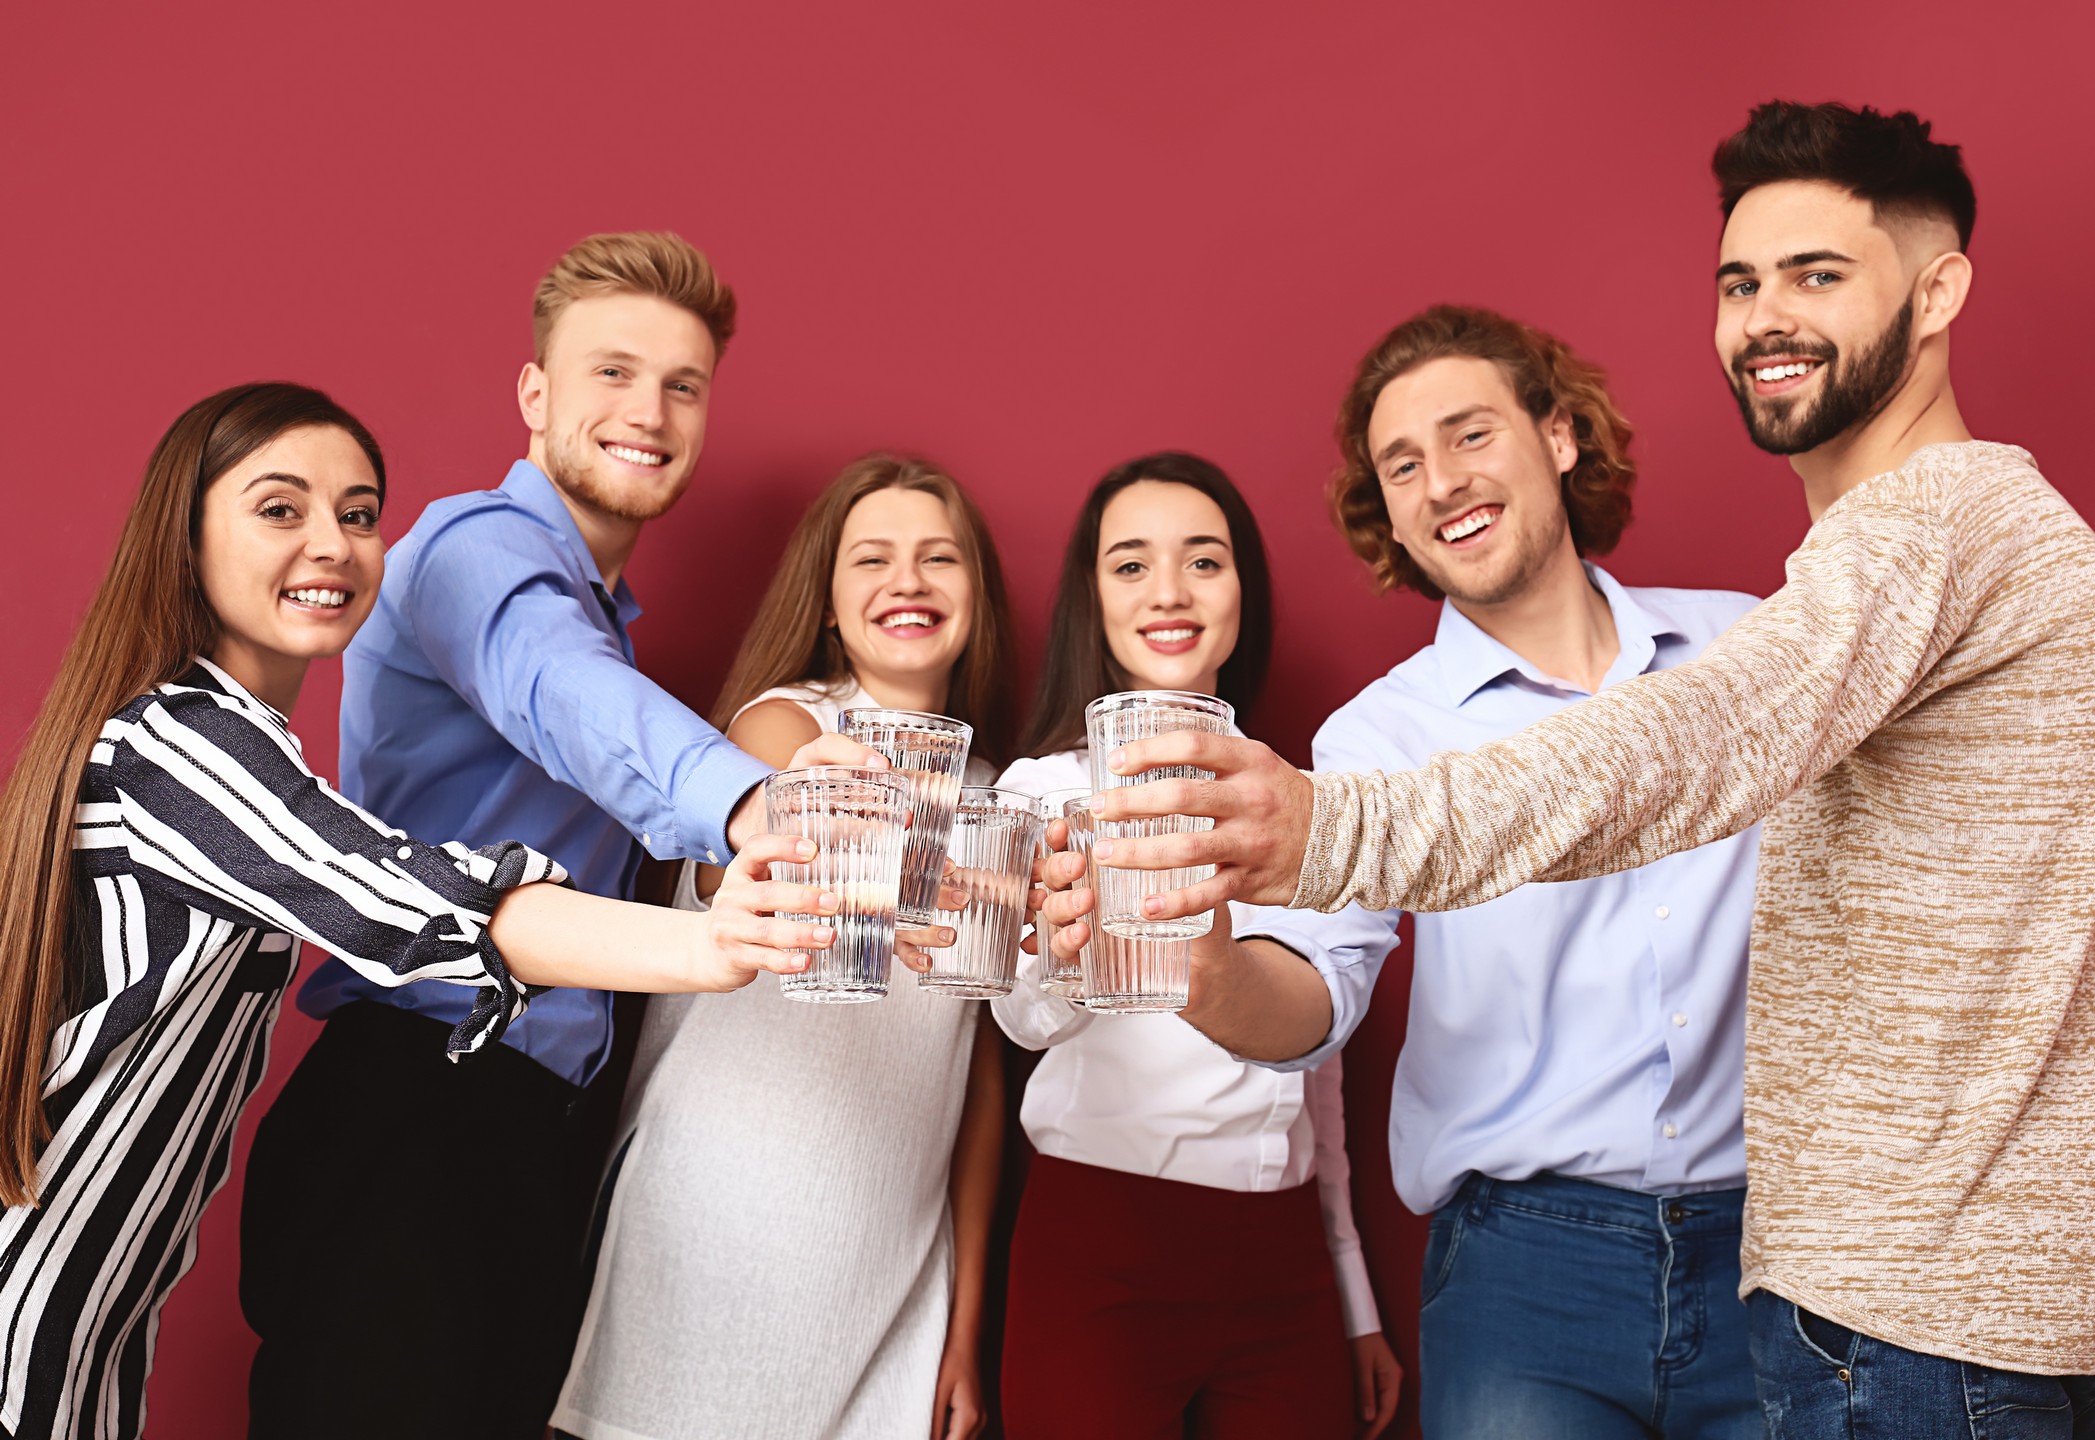 Denver Employee Perks | Positive Lifestyle Choices | Water Filtration System